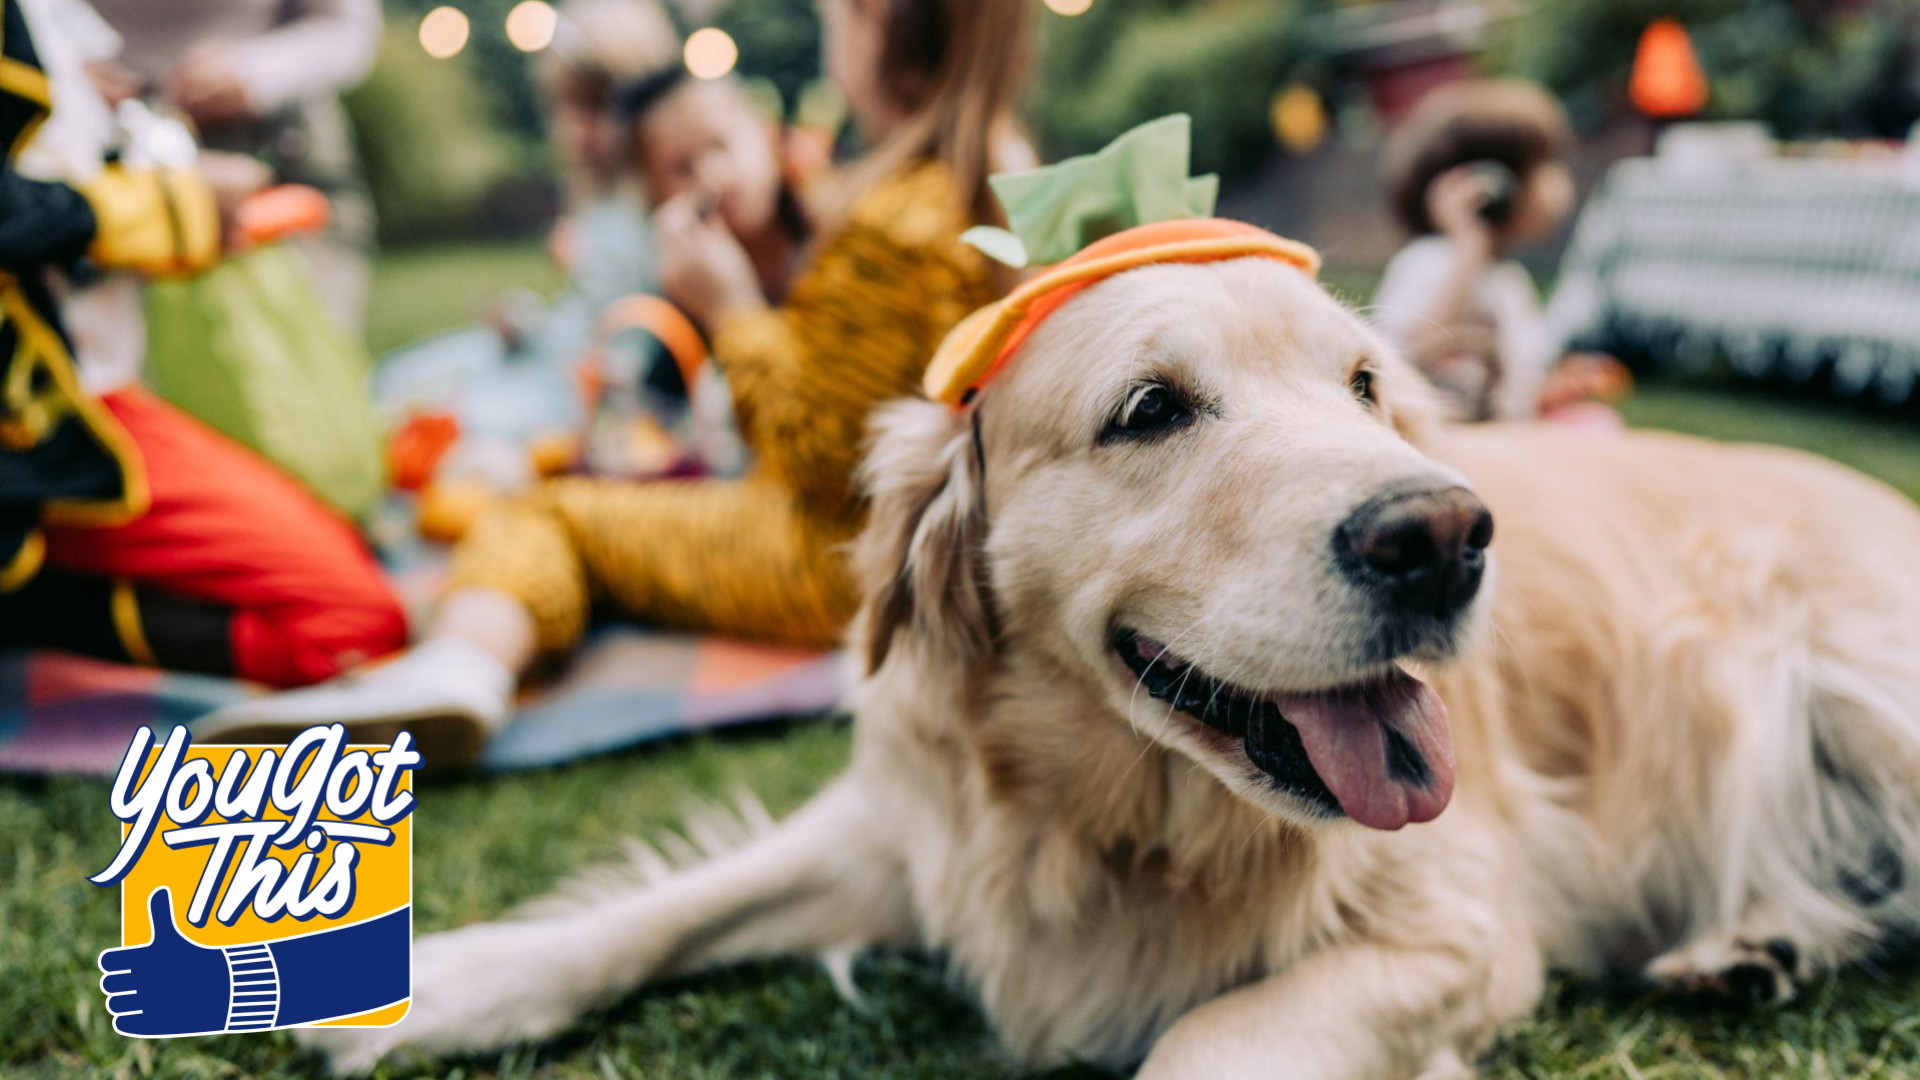 Get Halloween ready with great deals on pet costumes at Walmart